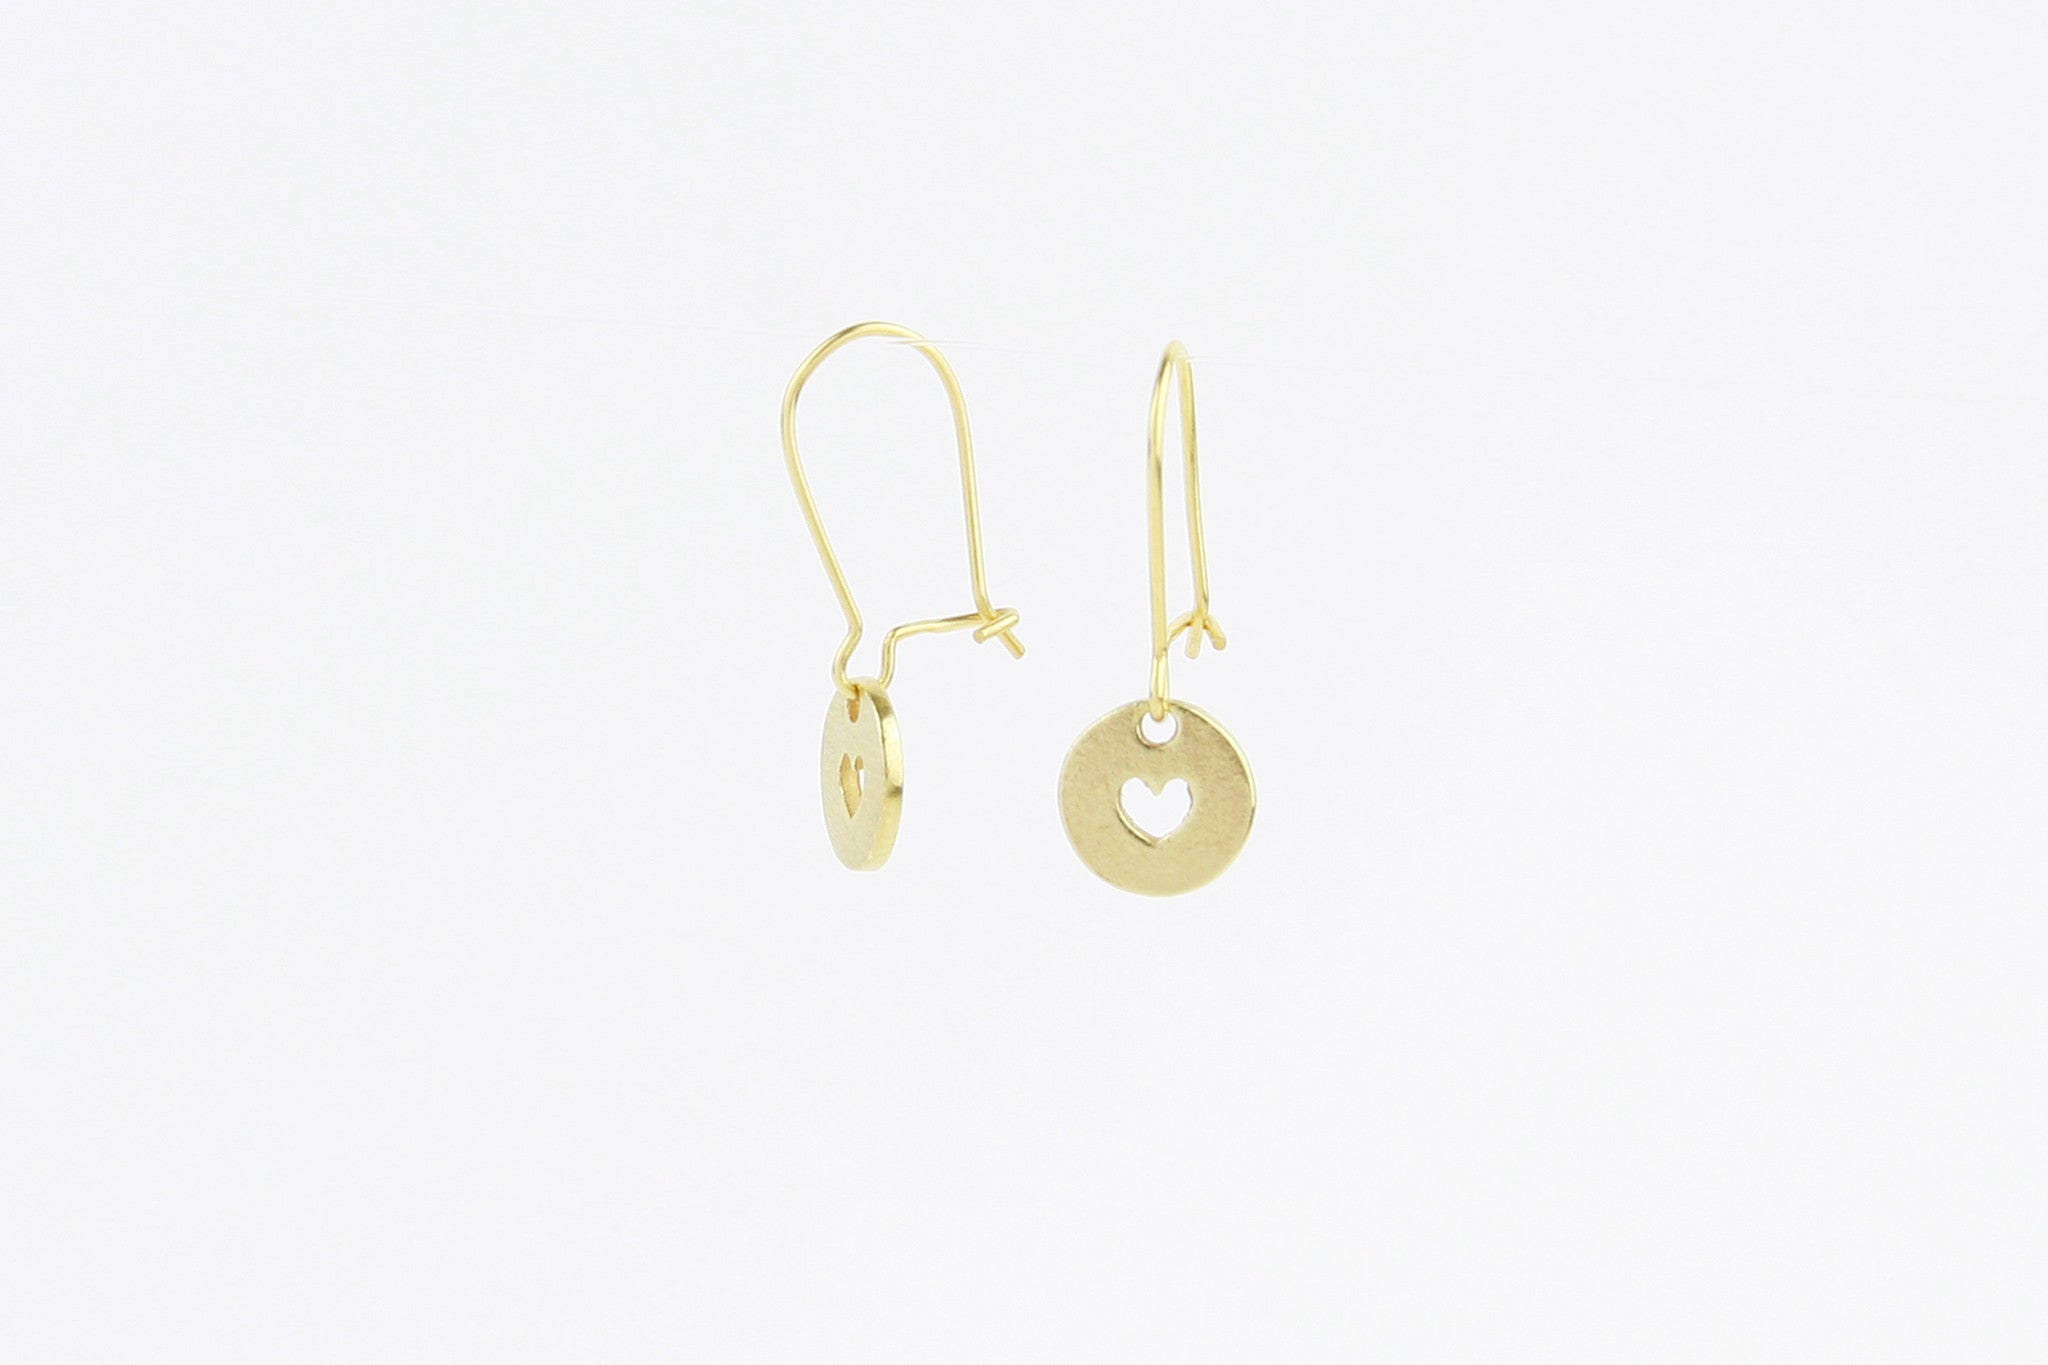 jewelberry ohrringe earrings love token yellow gold plated sterling silver fine jewelry handmade with love fairtrade